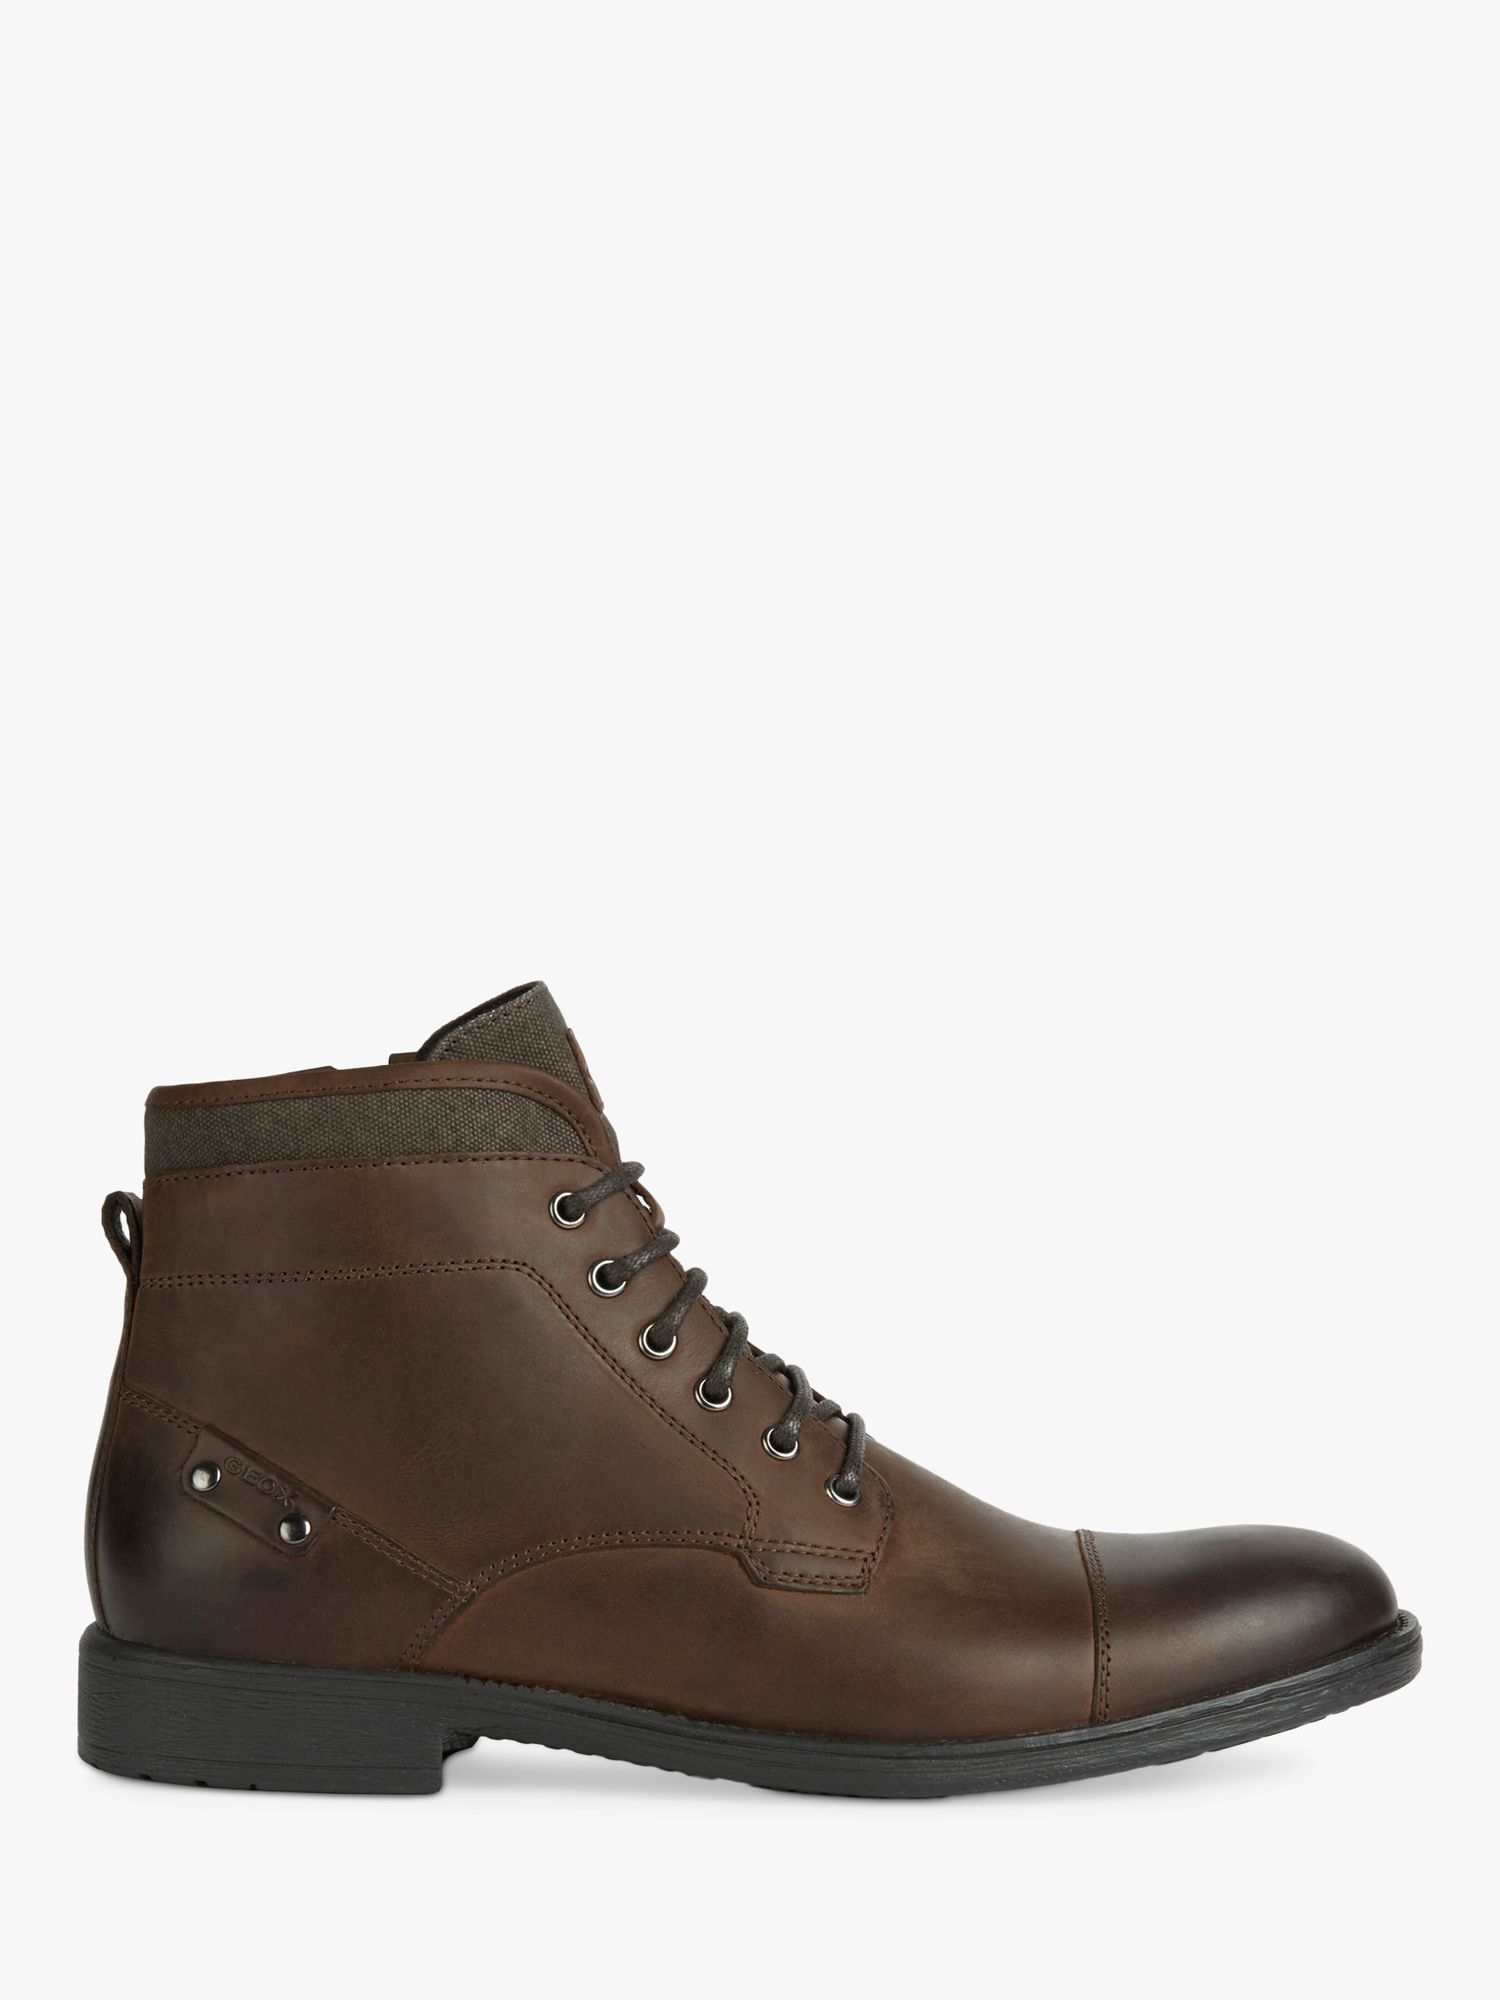 Geox Jaylon Leather Lace Up Ankle Dark Brown John & Partners